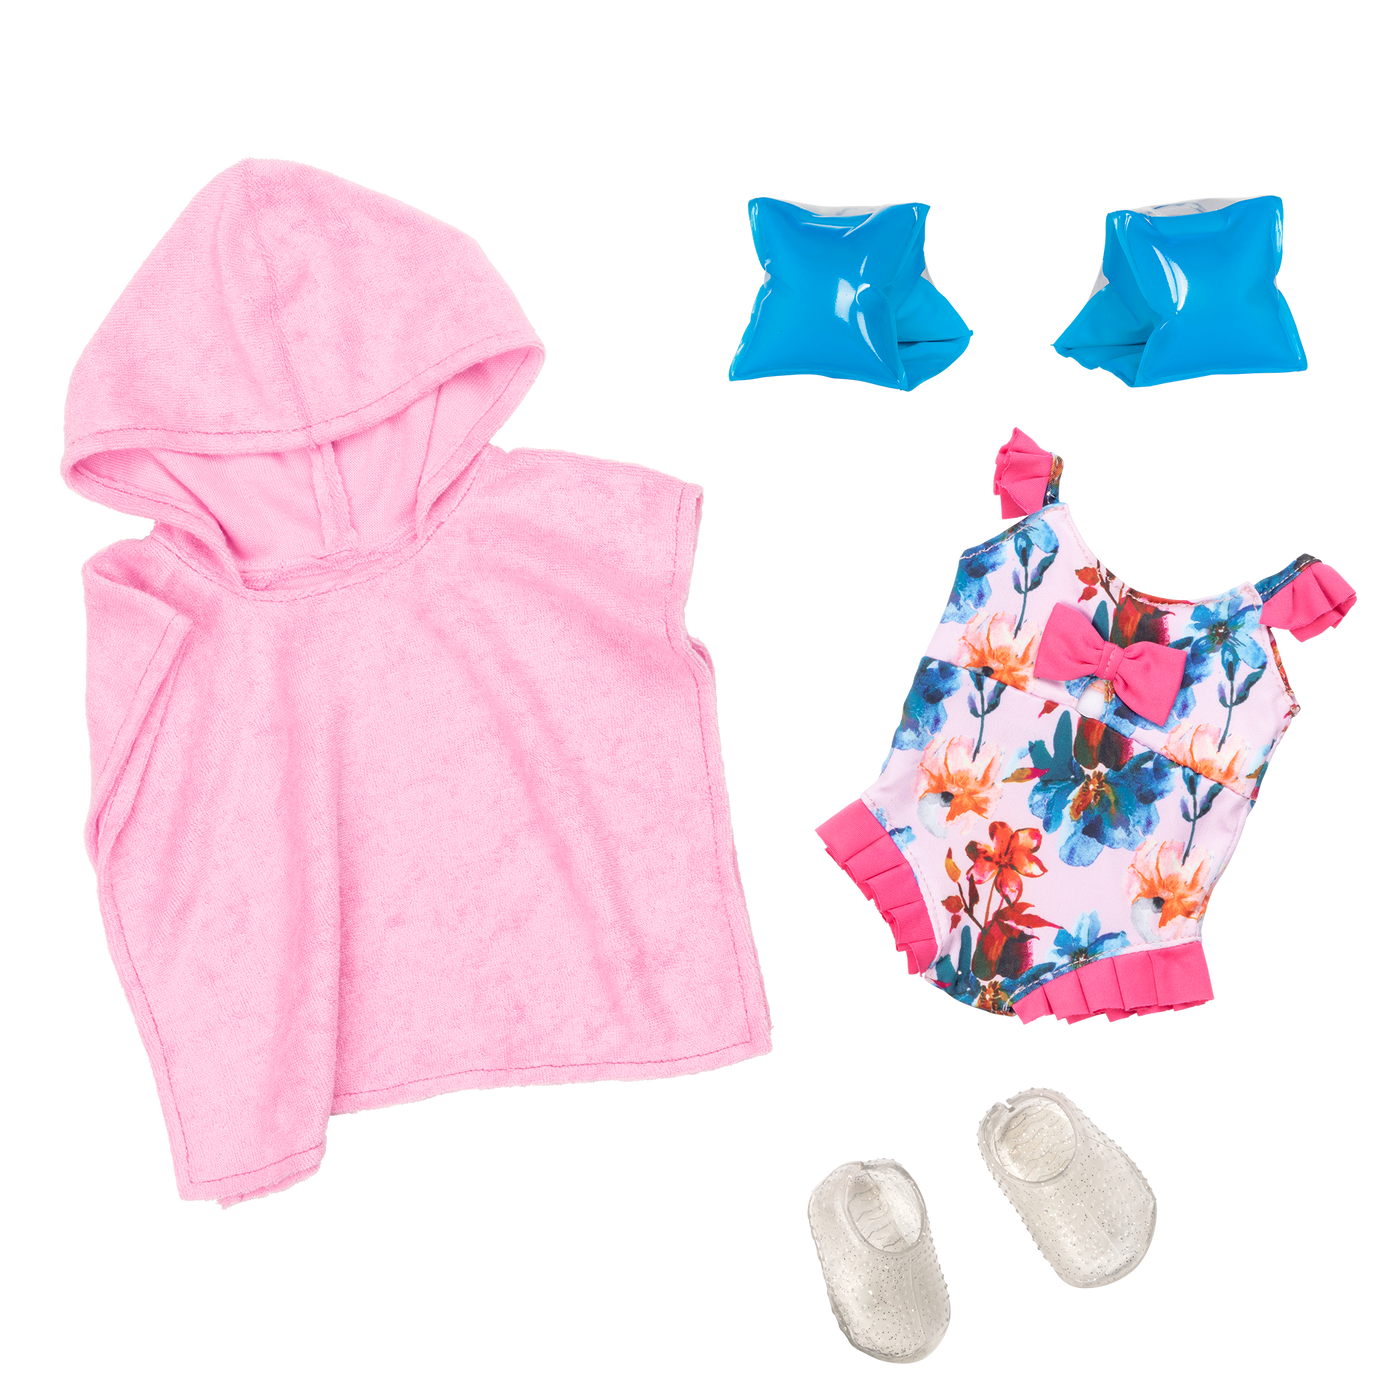 Seaside Blossom Swimsuit Outfit Hooded Towel for 18-inch Dolls